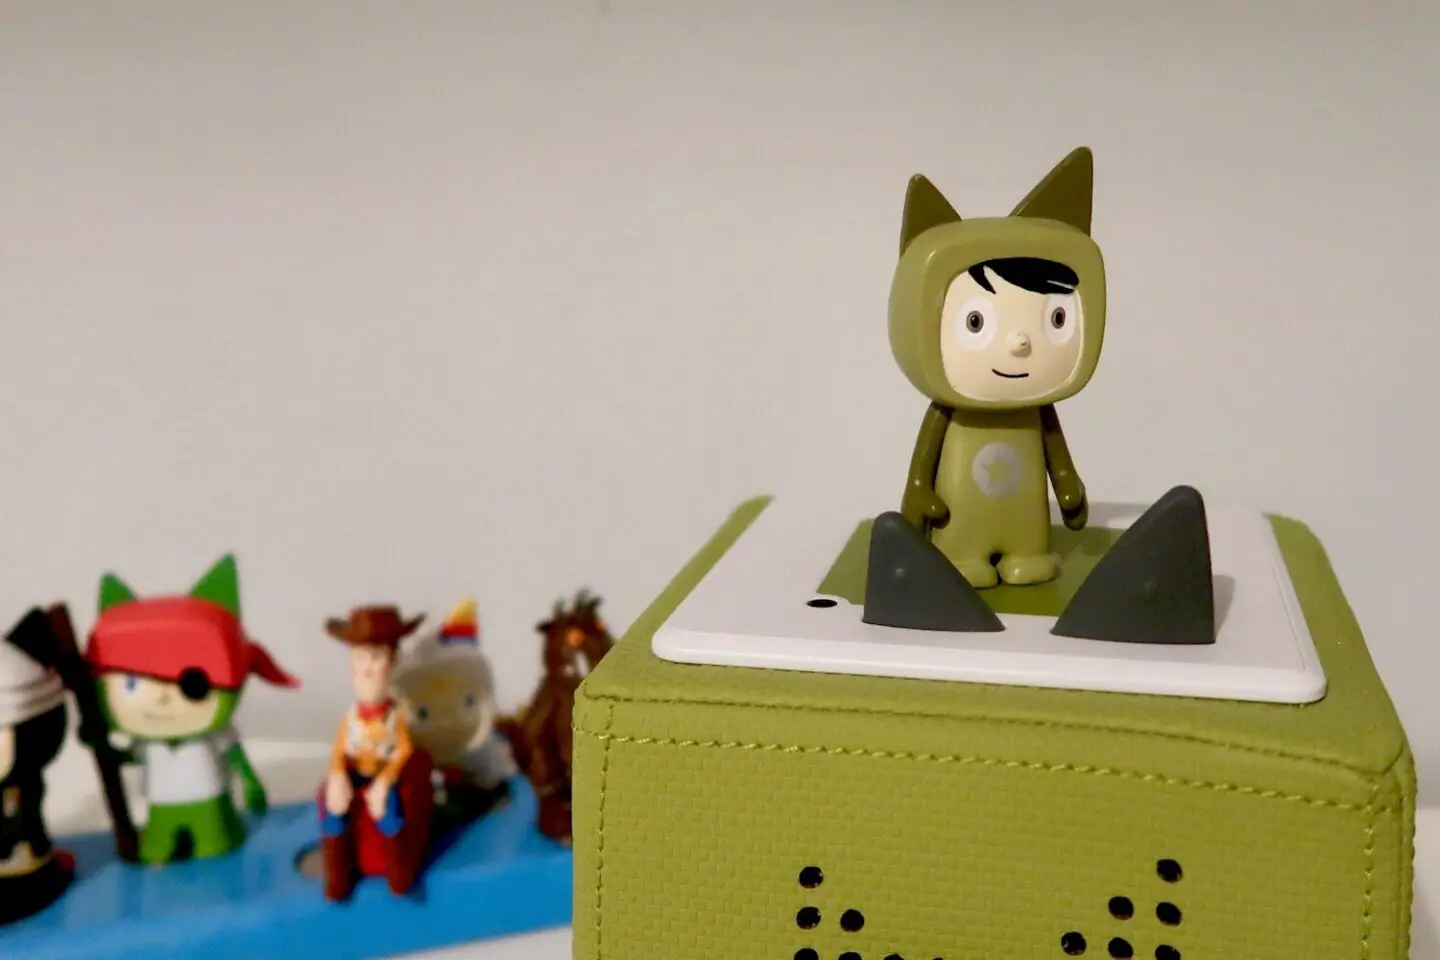 A green toniebox with a green creative tonie on the top. In the background and slightly out of focus are some other Tonies, including Woody, the Gruffalo and a pirate